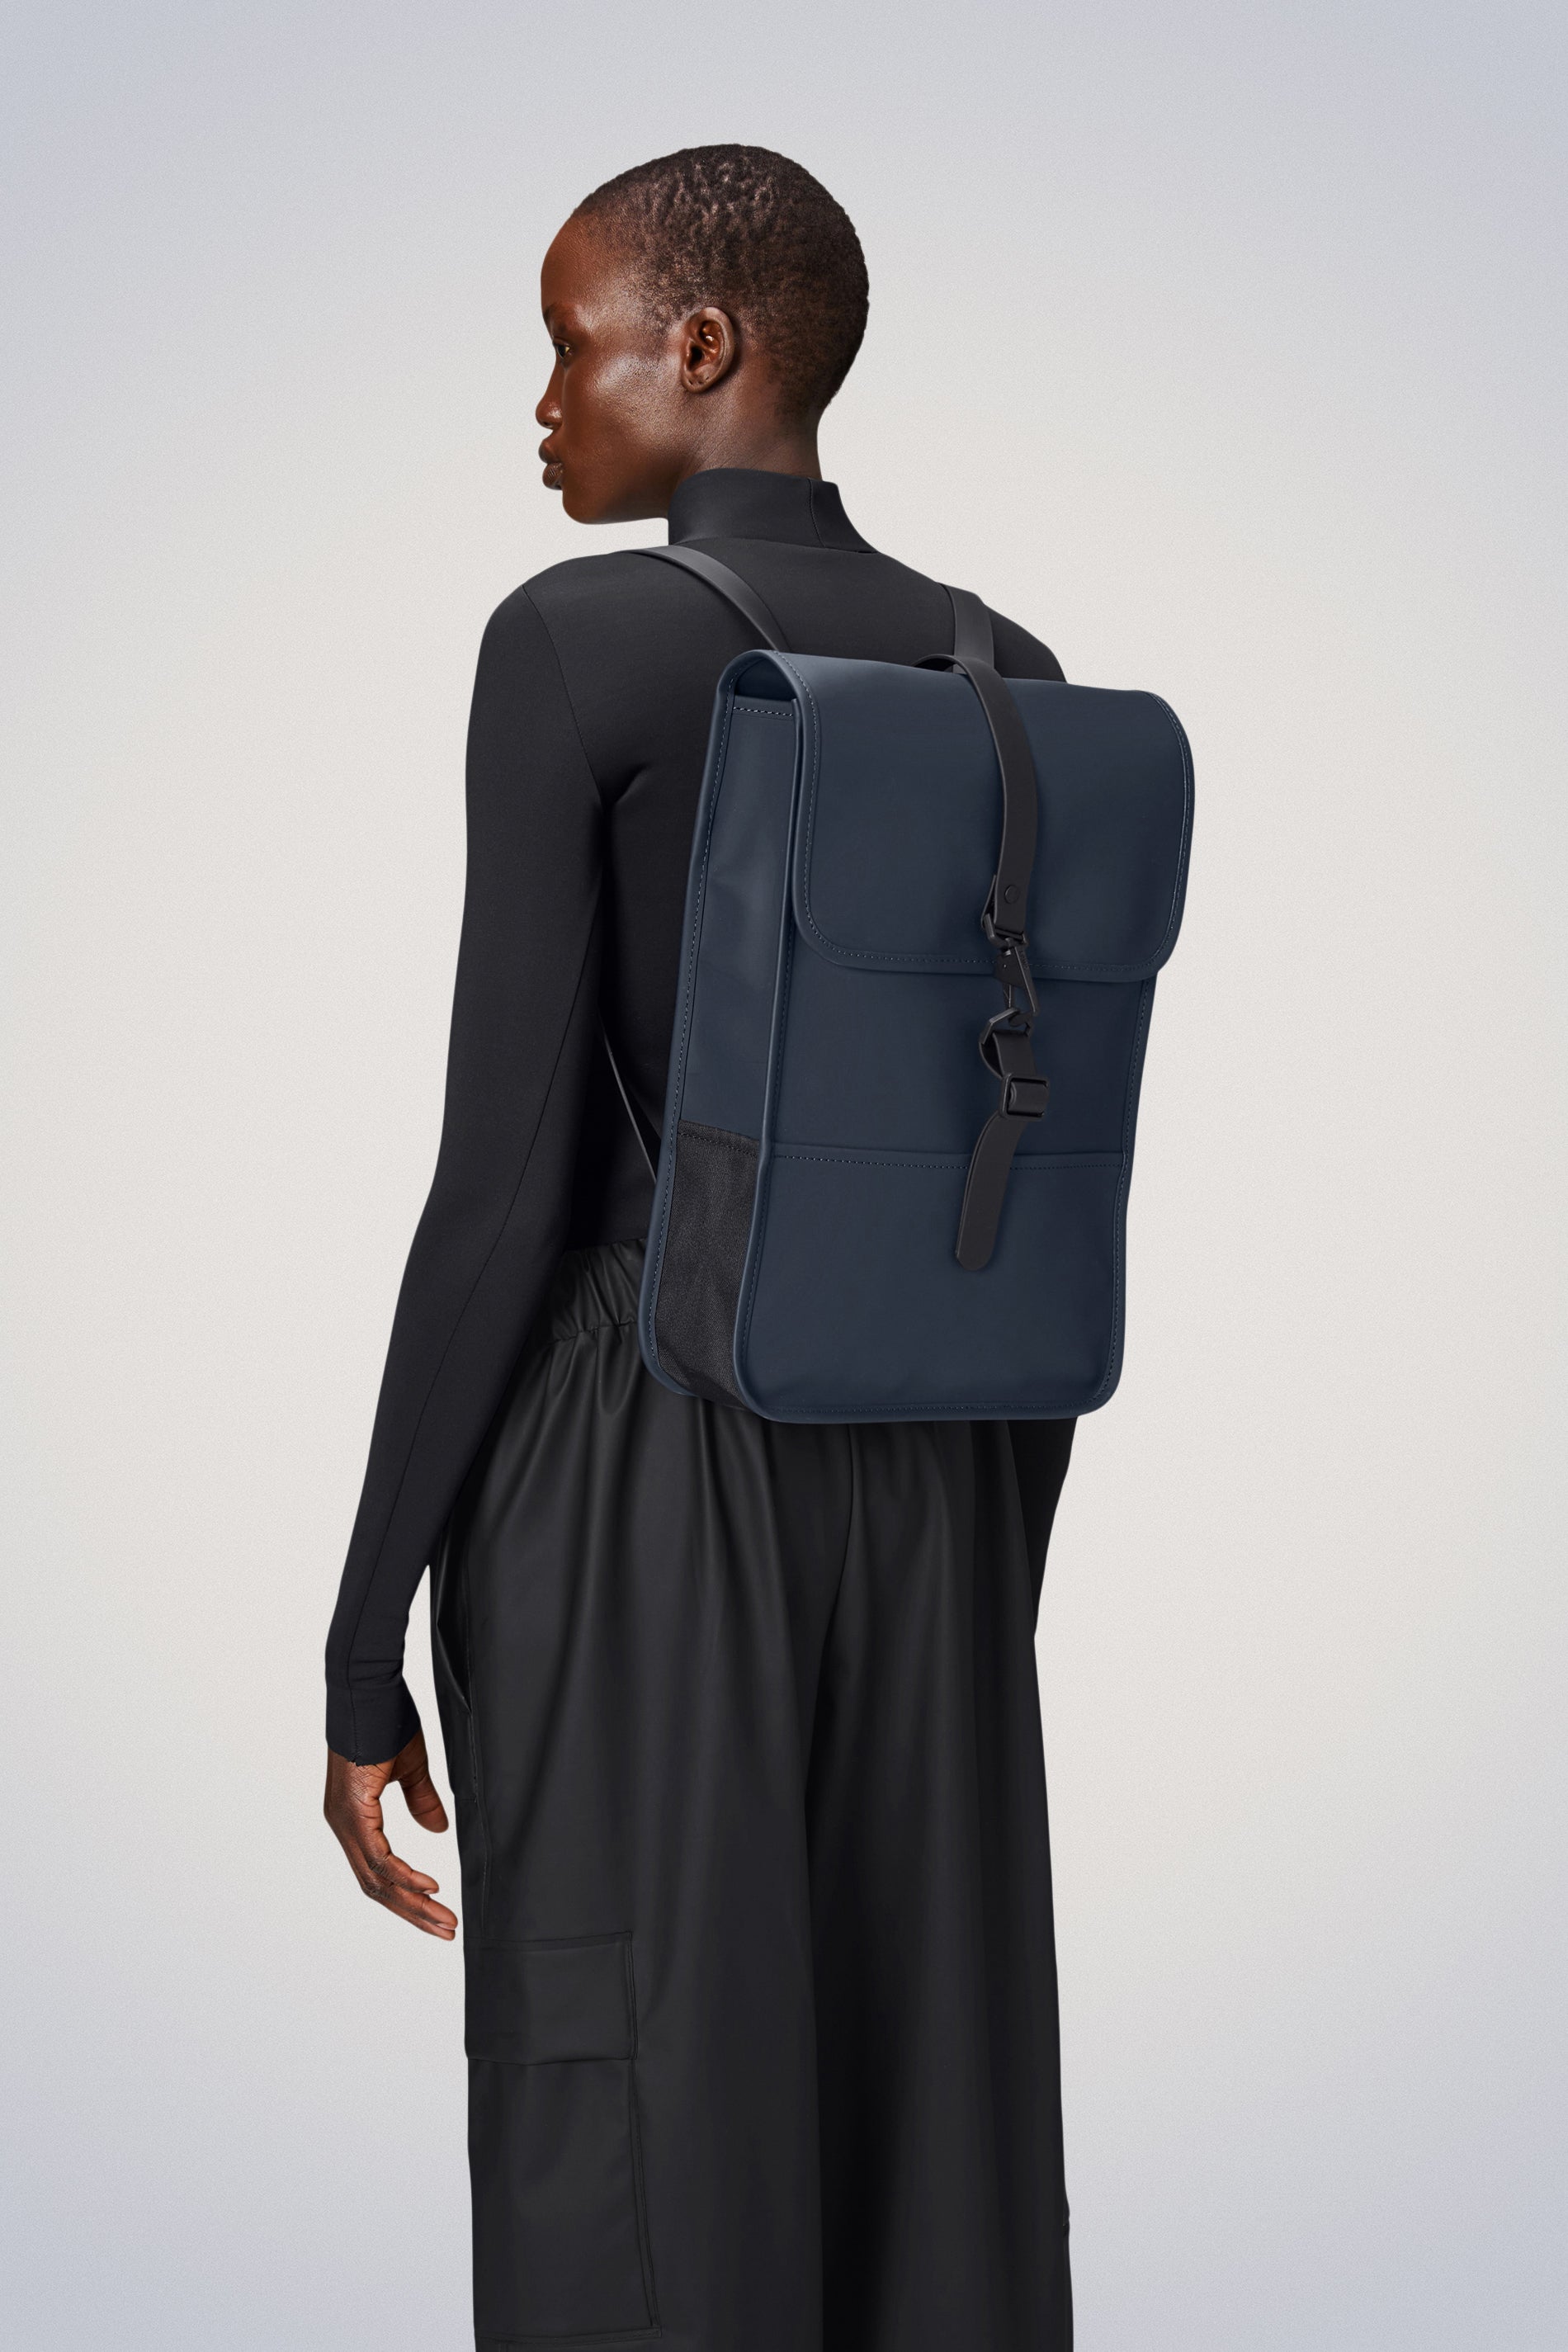 Rains® Backpack Mini in Navy for $110 | Free Shipping